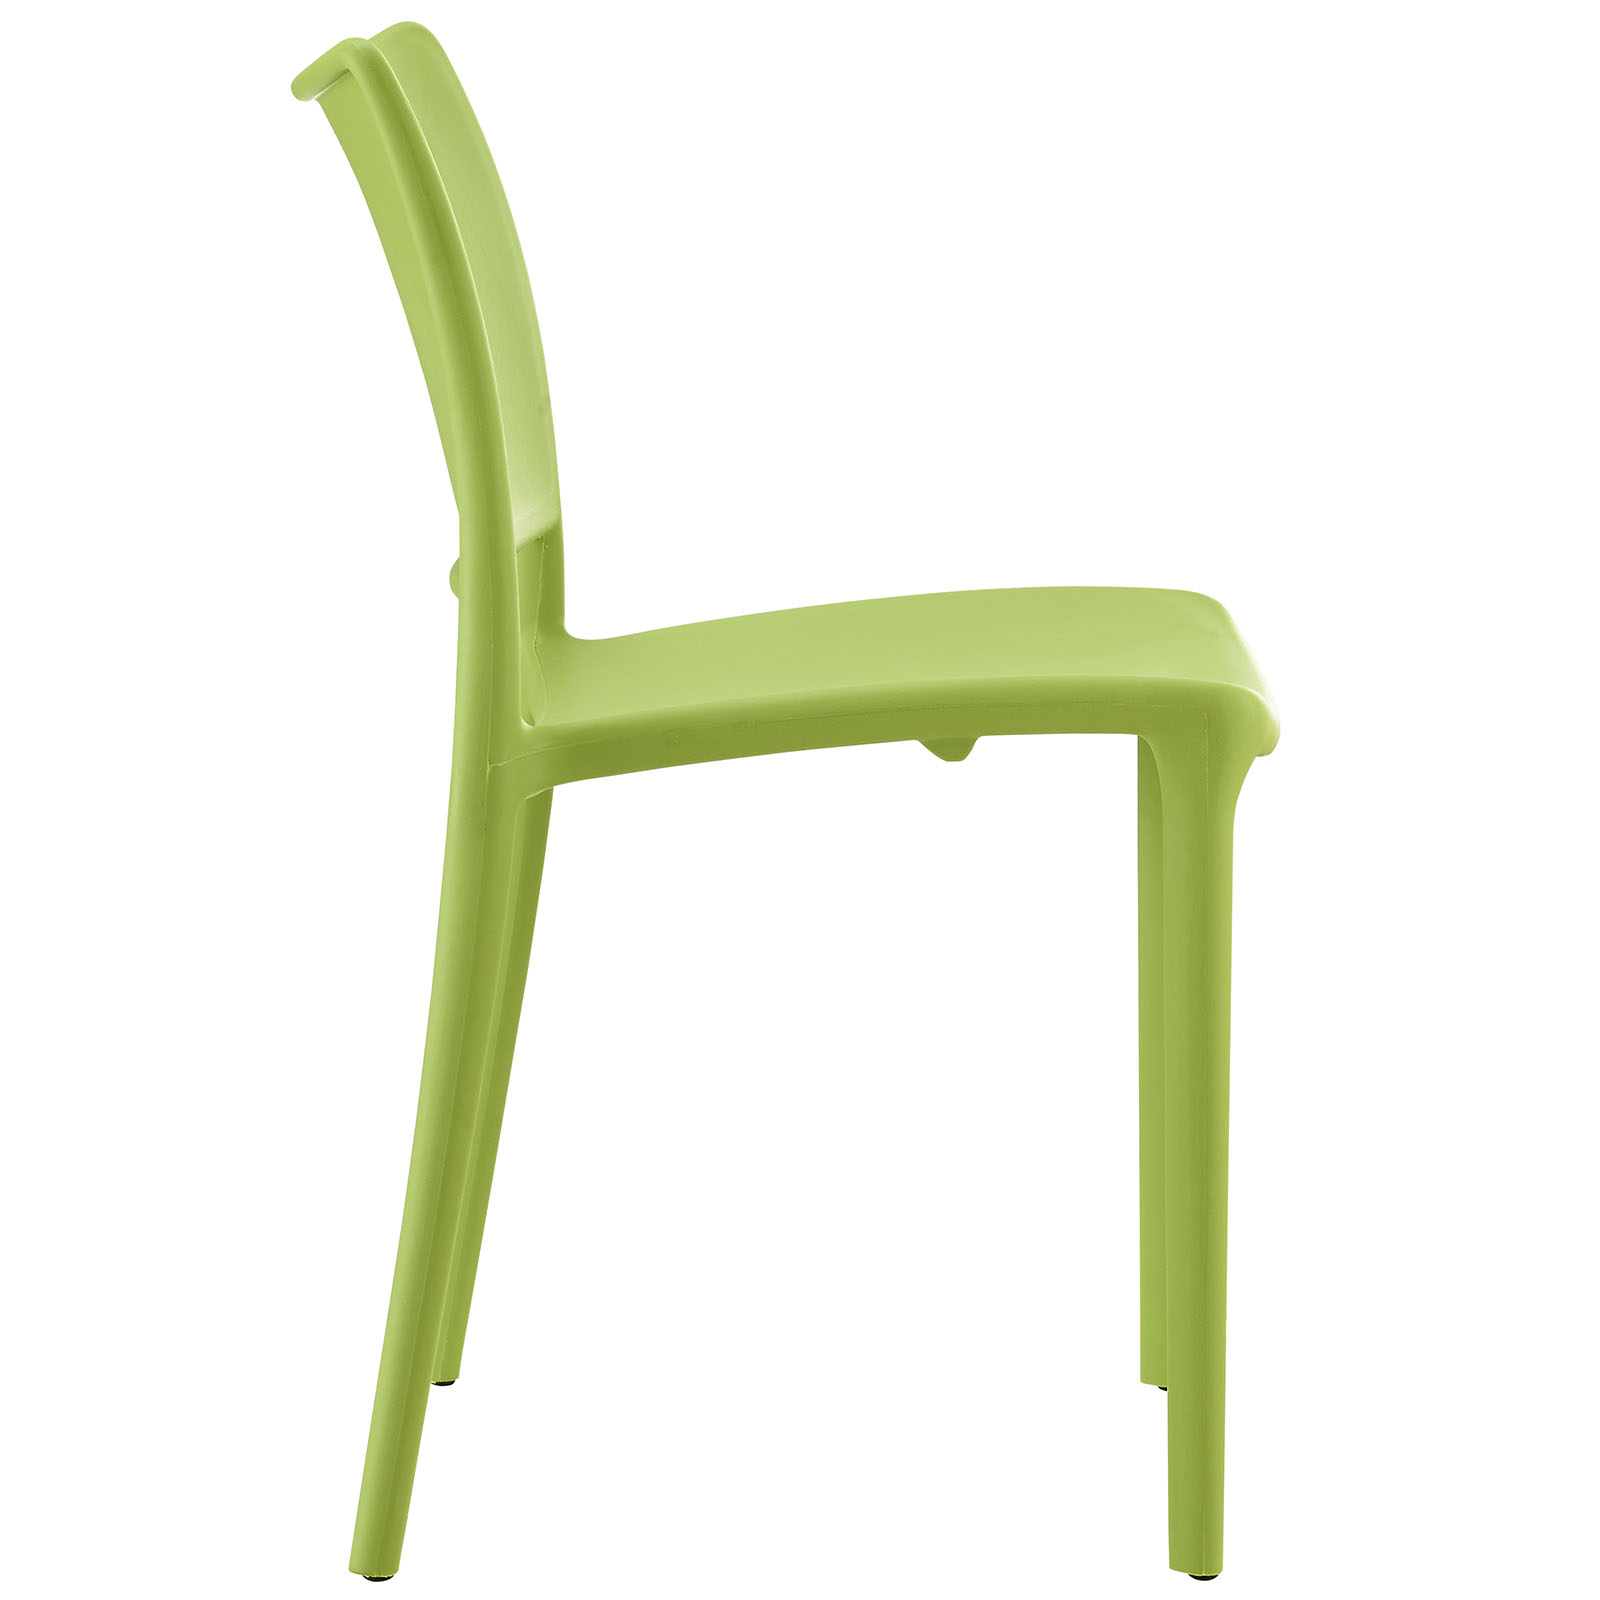 Modern Contemporary Urban Design Outdoor Kitchen Room Dining Chair ( Set of 4), Green, Plastic - image 4 of 5